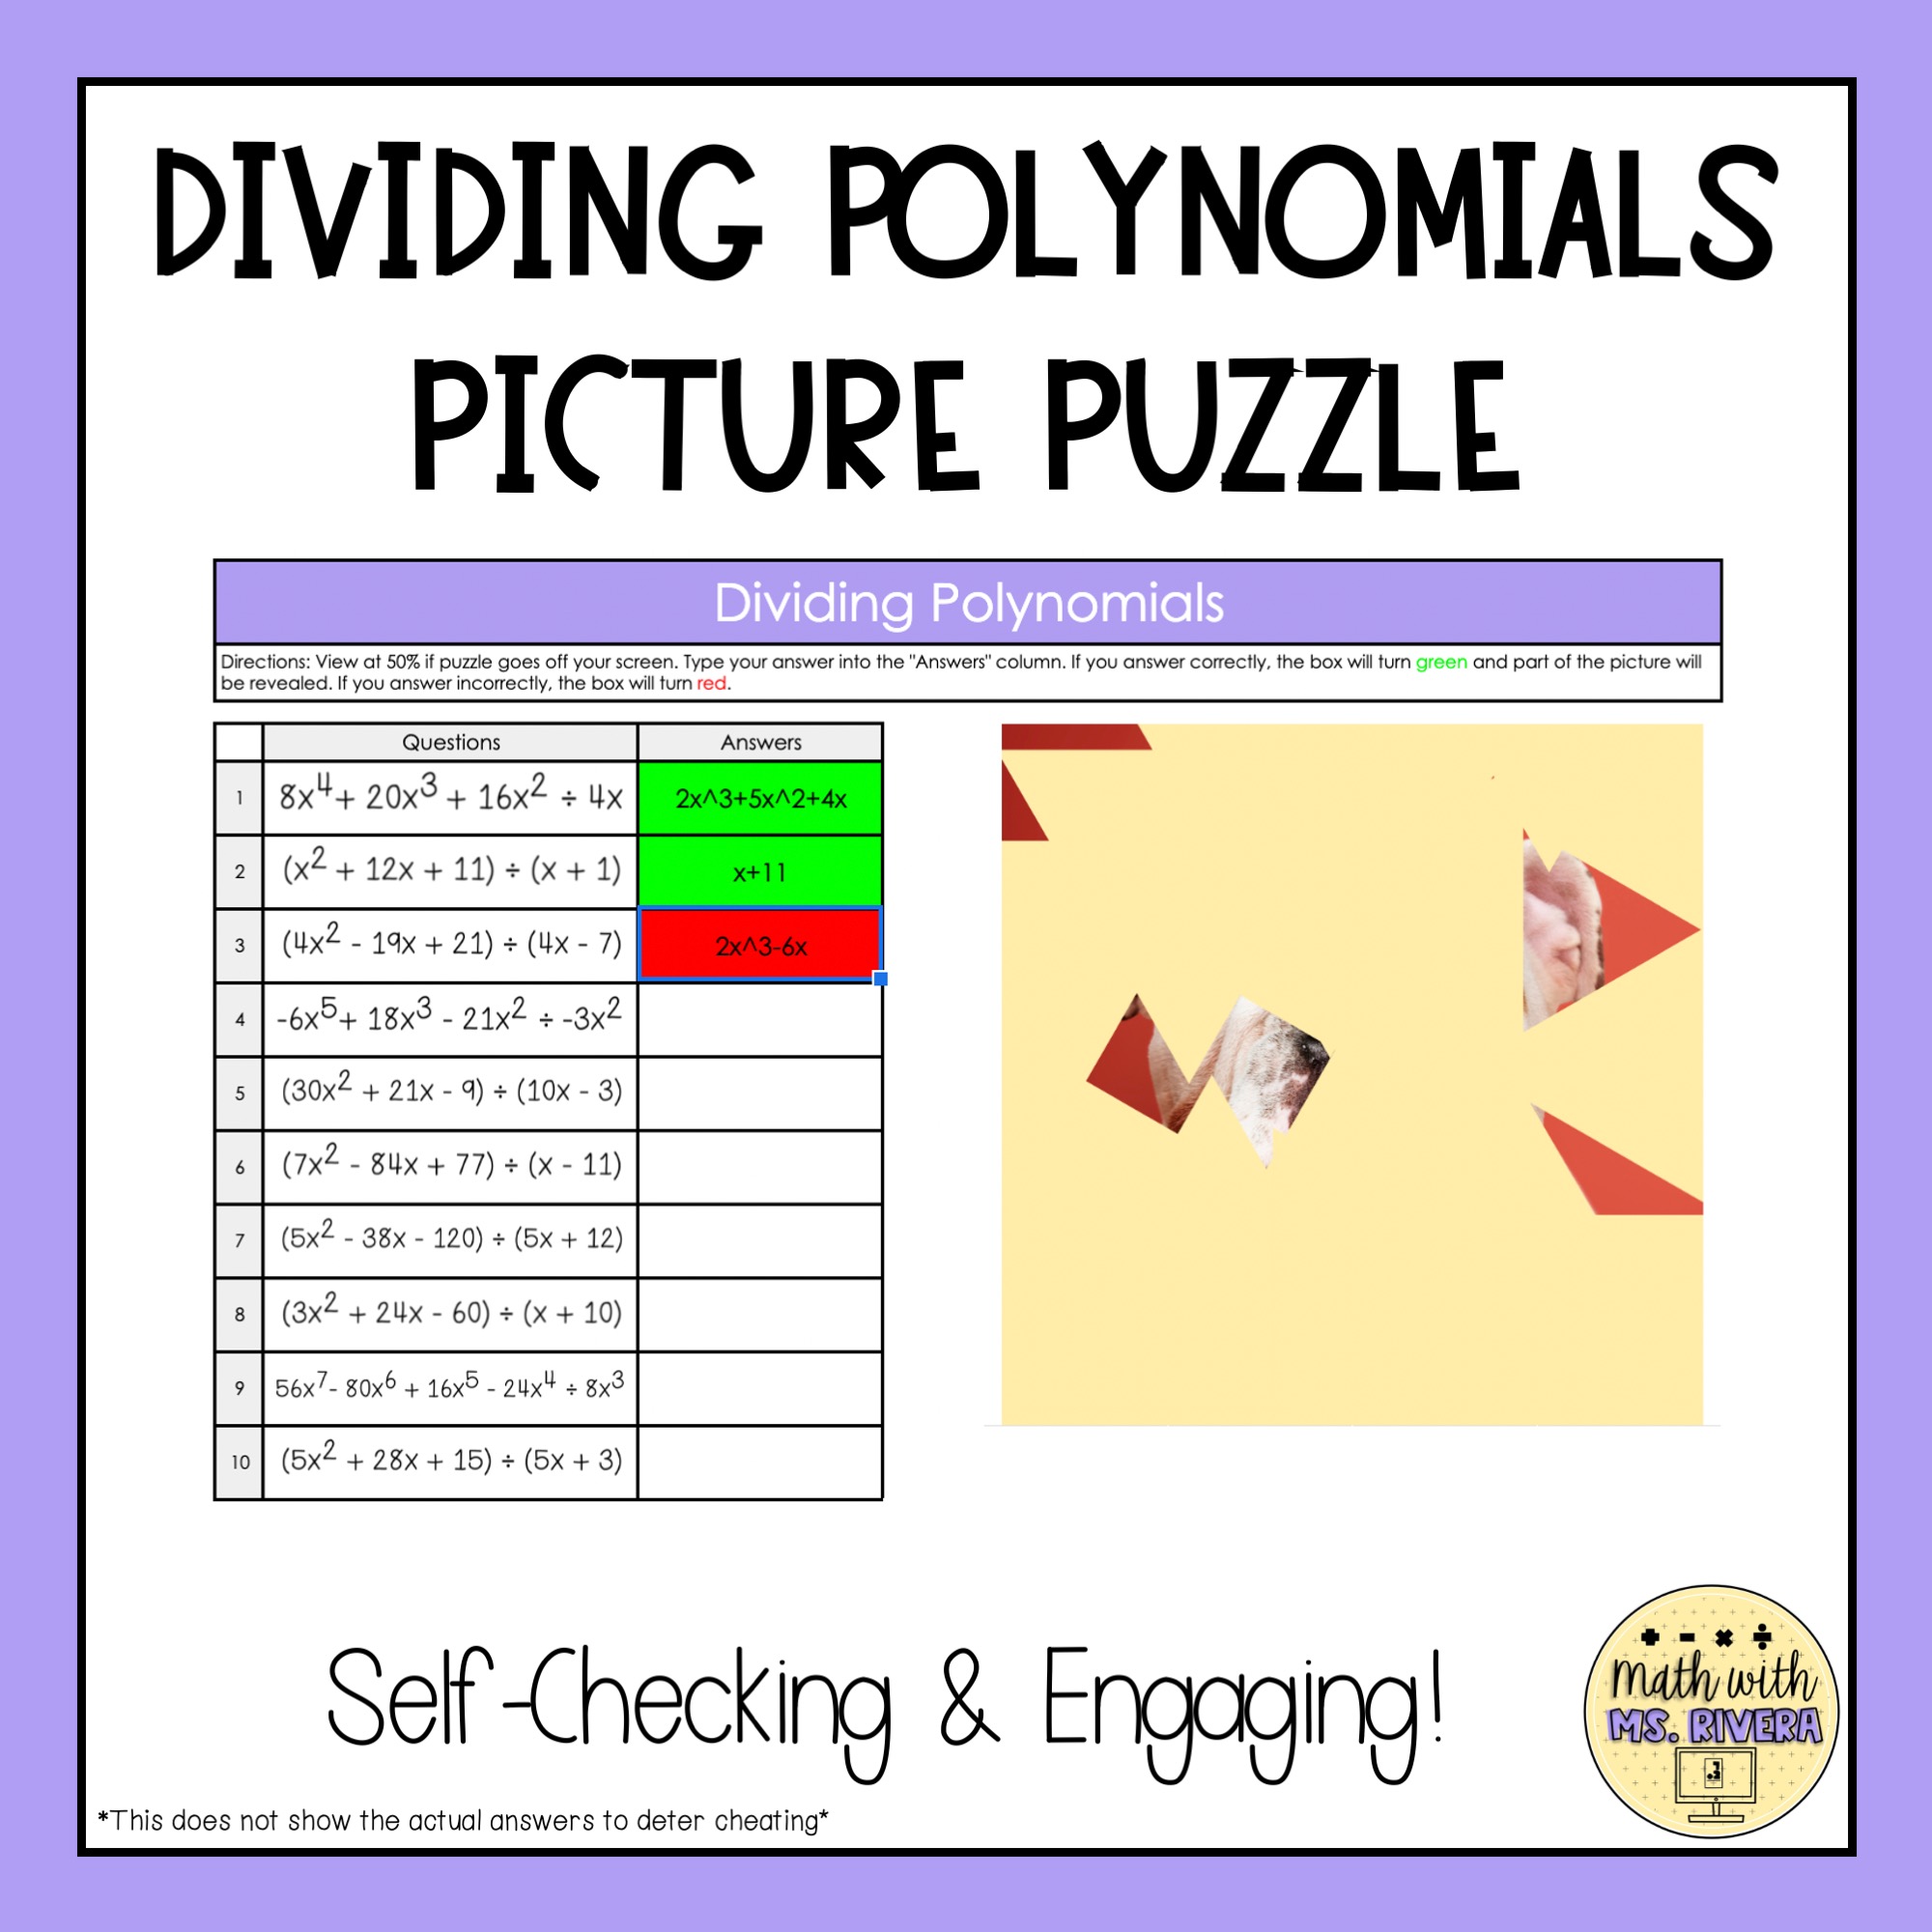 Dividing Polynomials Digital Picture Puzzle - Math with Ms. Rivera